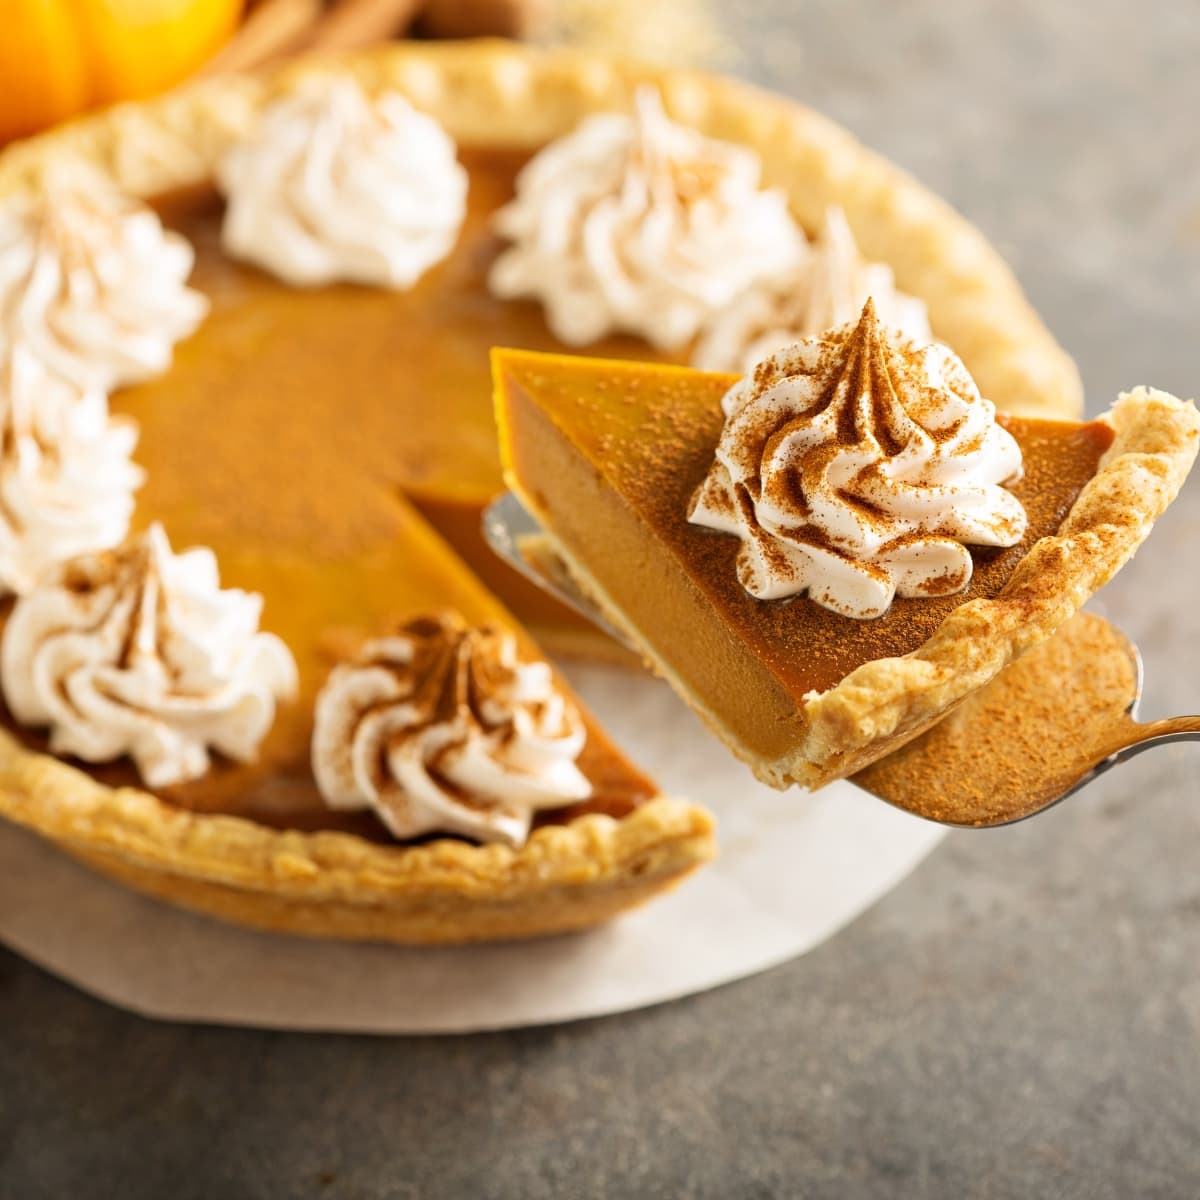 Slice of Pumpkin Pie with Whipped Cream and Cinnamon on a Pie Spatula in the Air, with the Rest of the Pumpkin Pie on a Board on the Table